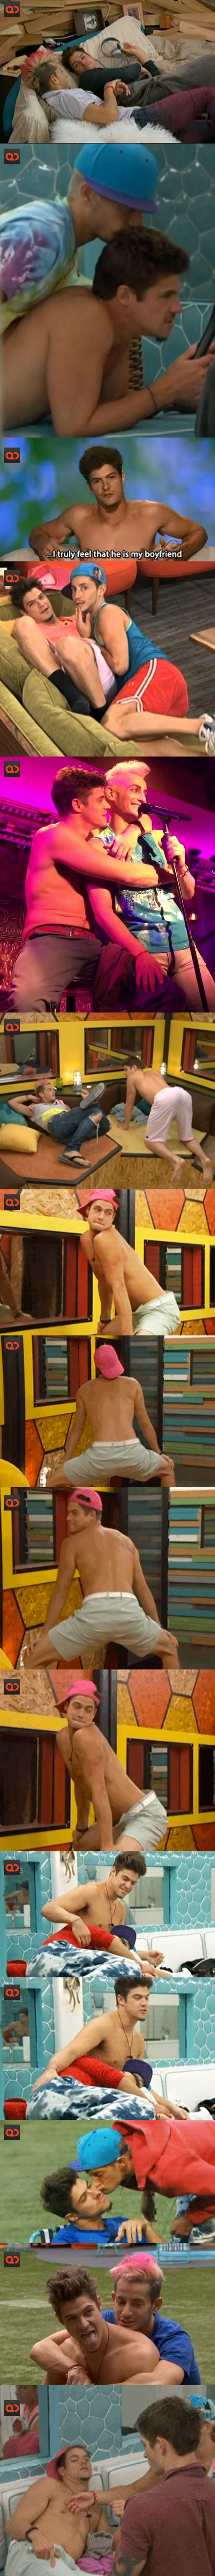 Zach Rance, From Big Brother 16, Cock Exposed In Leaked Naked Selfie!